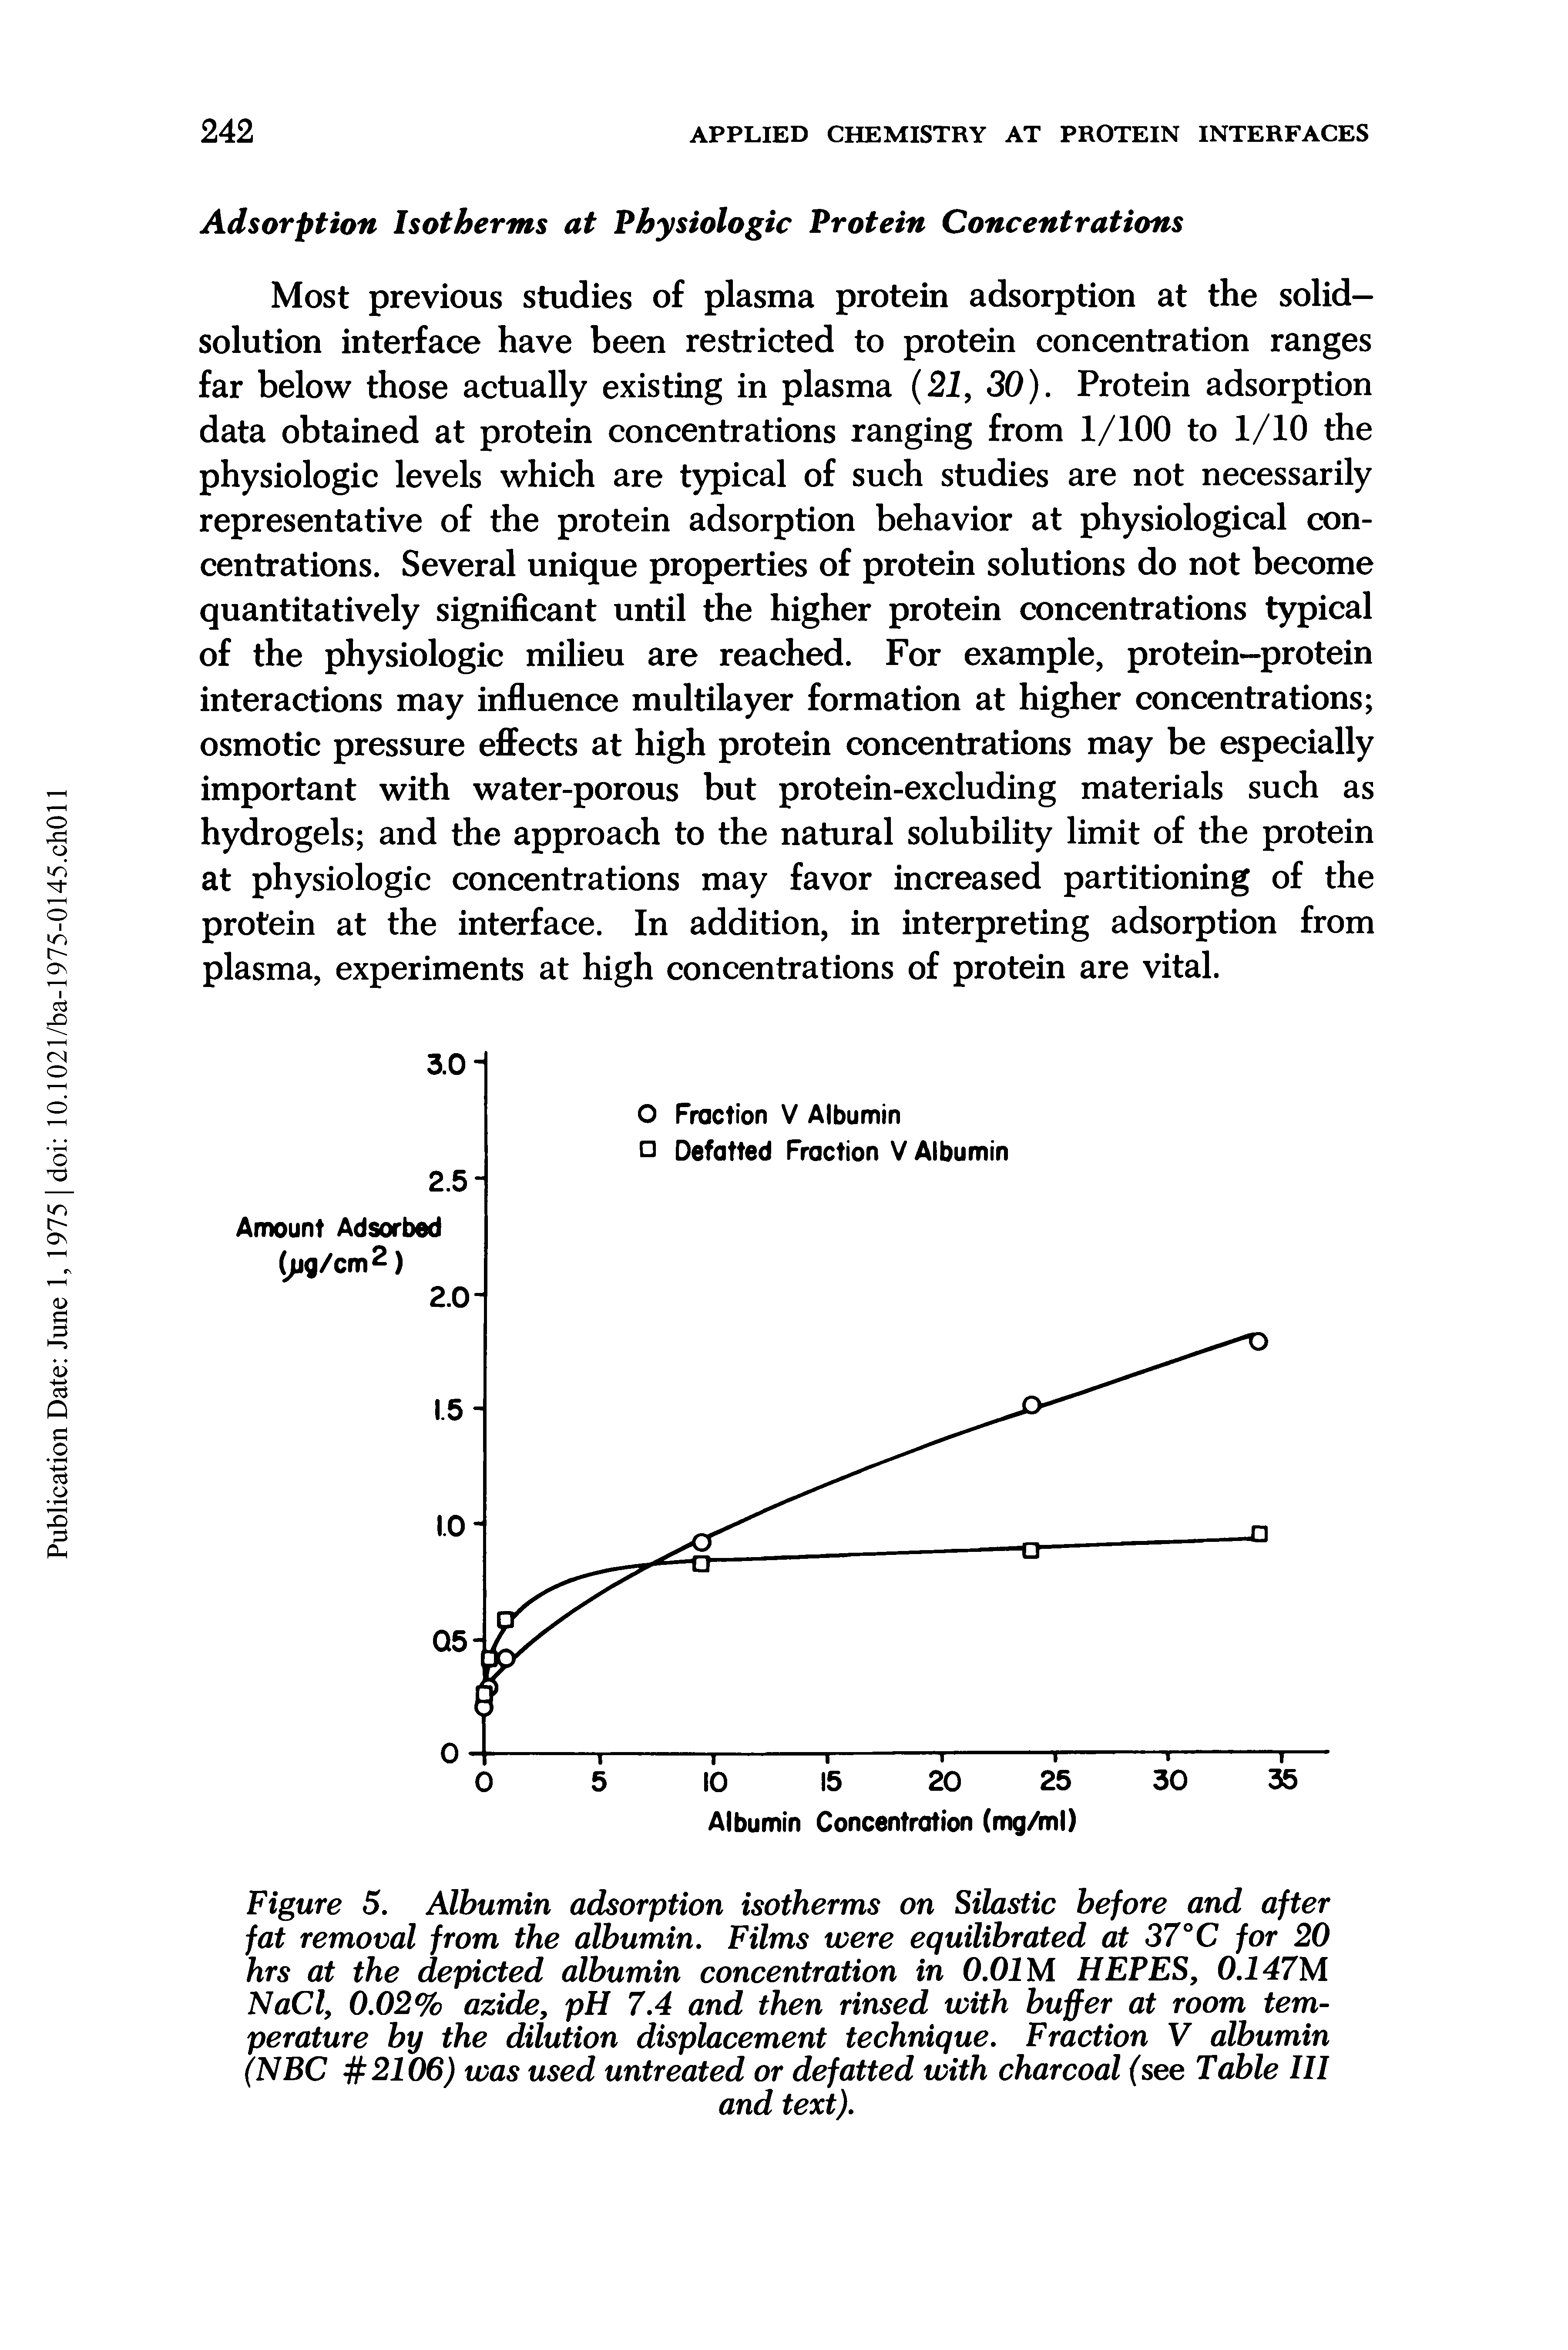 Figure 5. Albumin adsorption isotherms on Silastic before and after fat removal from the albumin. Films were equilibrated at 37°C for 20 hrs at the depicted albumin concentration in O.OIM HEPES, 0.147M NaCl, 0.02% azide, pH 7.4 and then rinsed with buffer at room temperature by the dilution displacement technique. Fraction V albumin (NBC 2106) was used untreated or defatted with charcoal (see Table III...